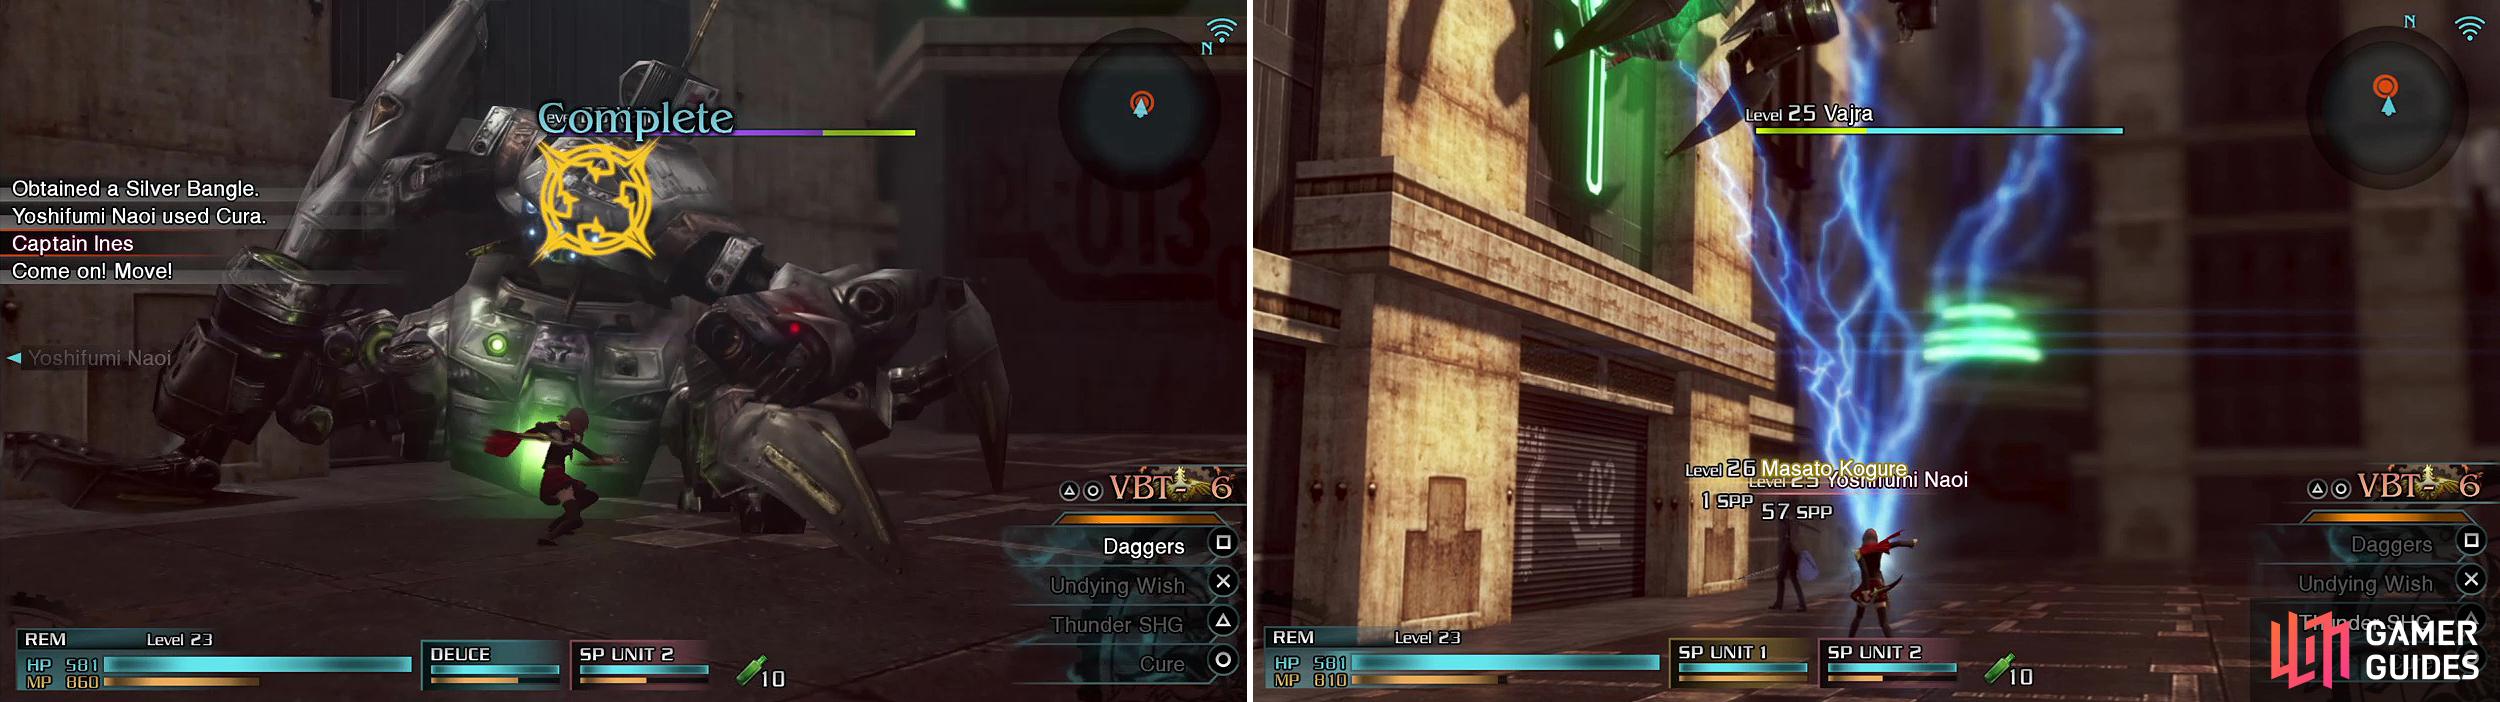 If you inflict a Breaksight or two, you will get repeated Breaksight opportunities (left). When Vajra is on a building, used ranged attacks like Thunder (right) to knock it off.